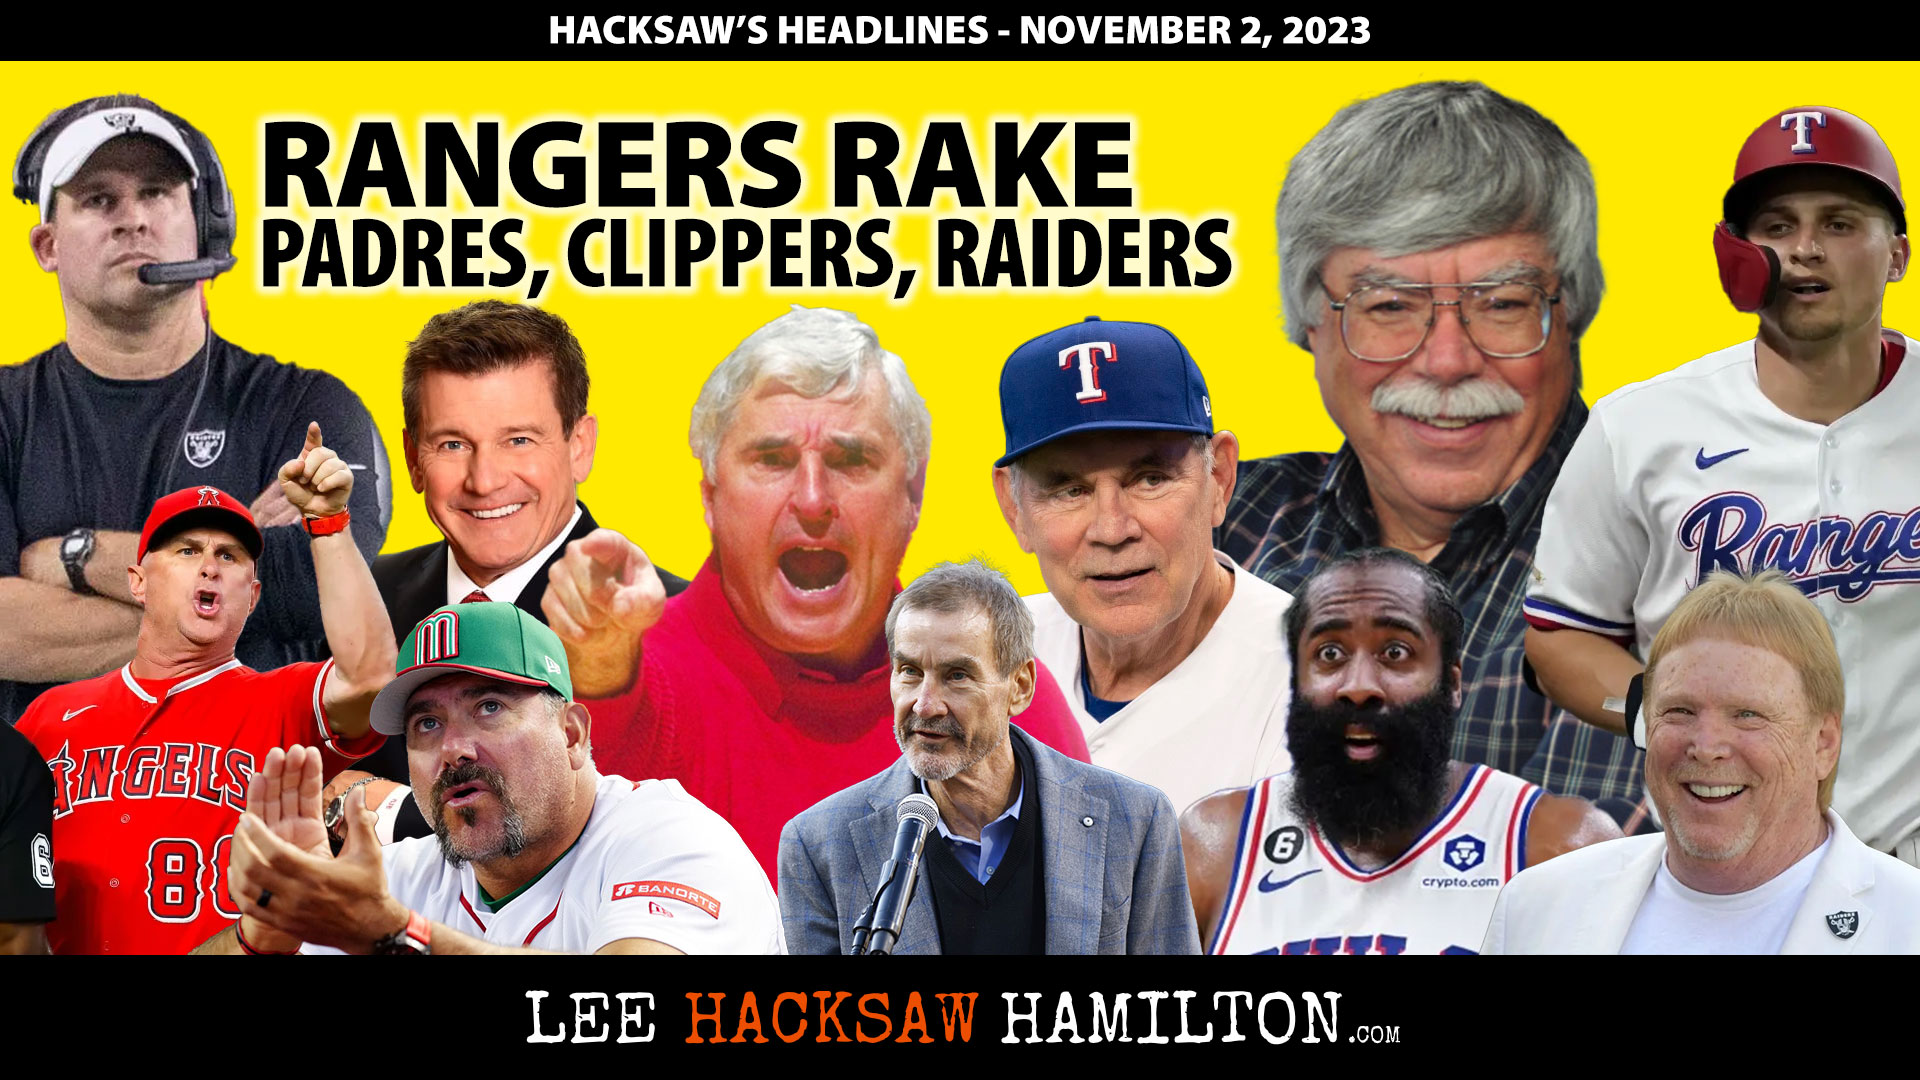 Lee Hacksaw Hamilton discusses Bochy/Rangers win World Series, Padres Financial Trouble, Clippers, Bobby Knight, Raiders, NFL